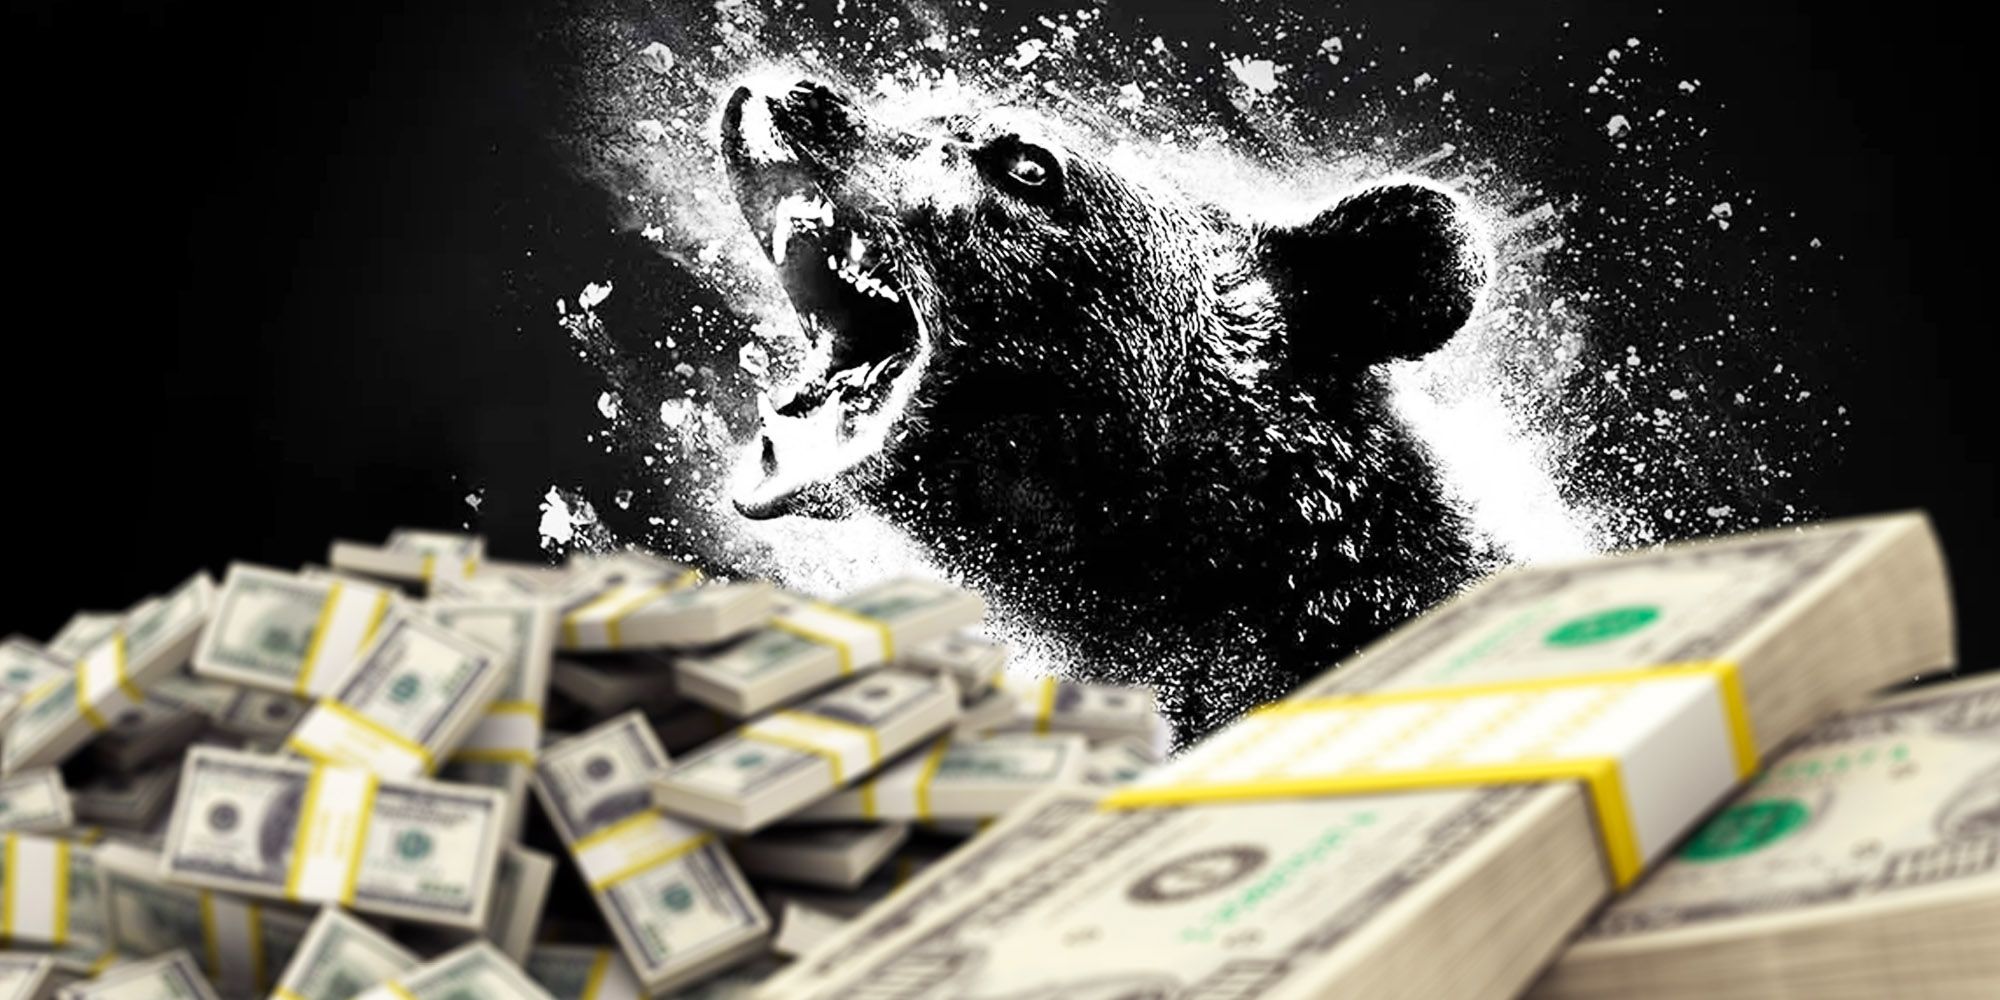 Box Office: 'Cocaine Bear' Draws Solid Opening, 'Ant-Man 3' Plummets